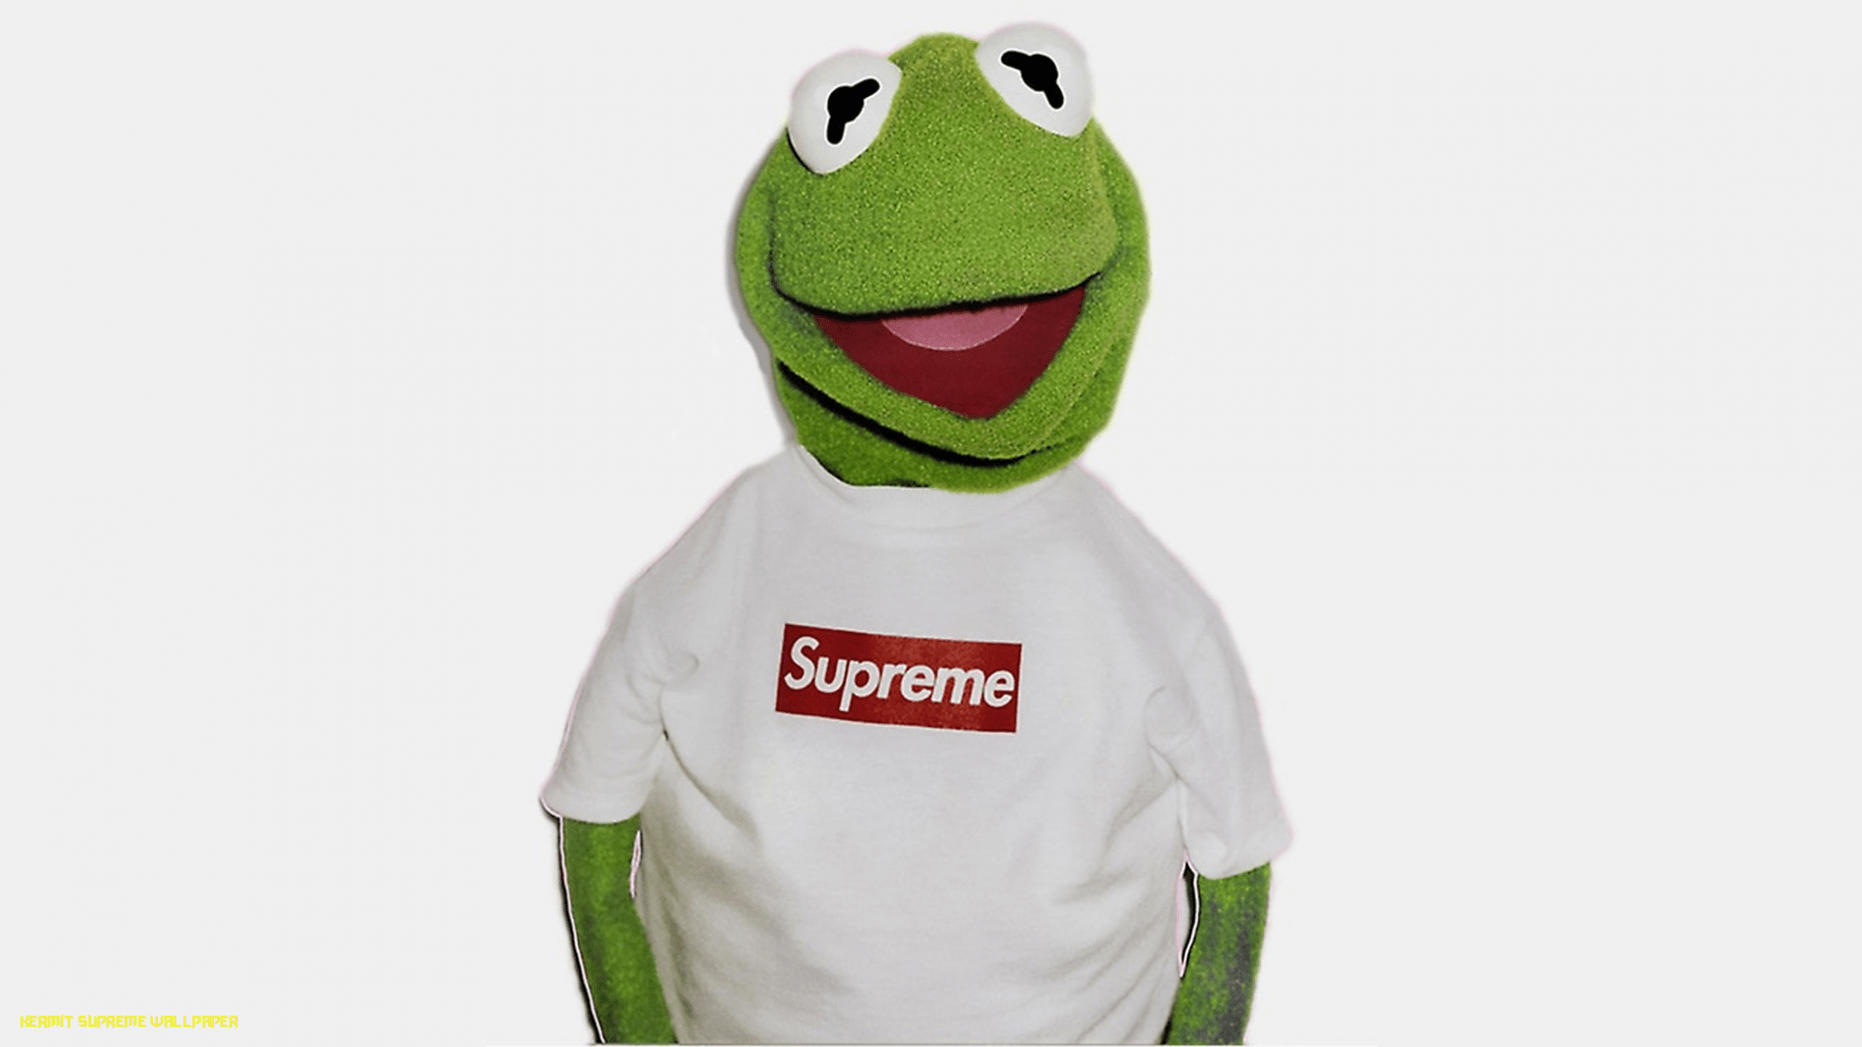 Kermit Supreme Wallpaper (1920×1080), Couldnt find one so